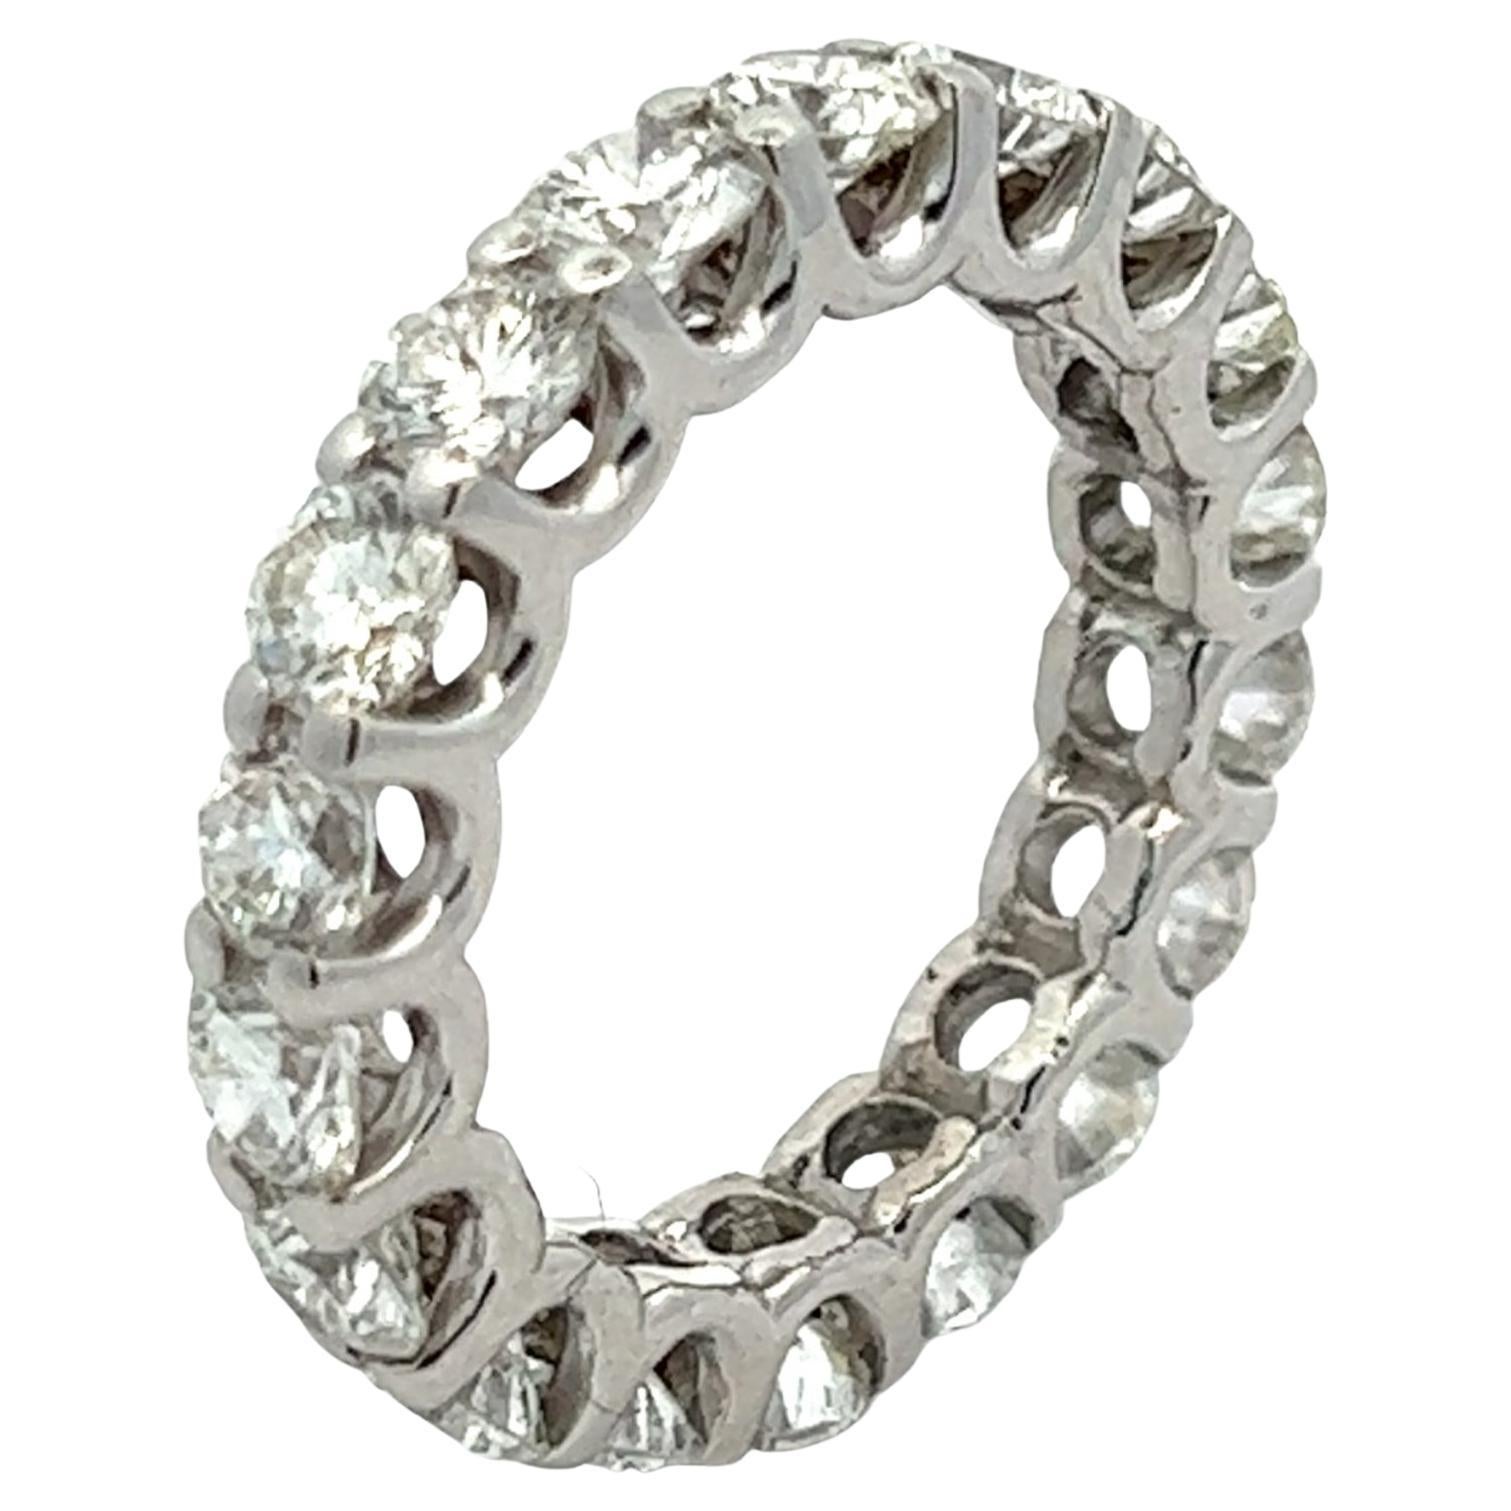 Beautiful diamond eternity wedding band handcrafted in 18 karat white gold. The band features 18 round brilliant cut diamonds weighing approximately 2.70 carat total weight and graded F-G color and VS2-SI1 clarity. The ring is size 3.75. 